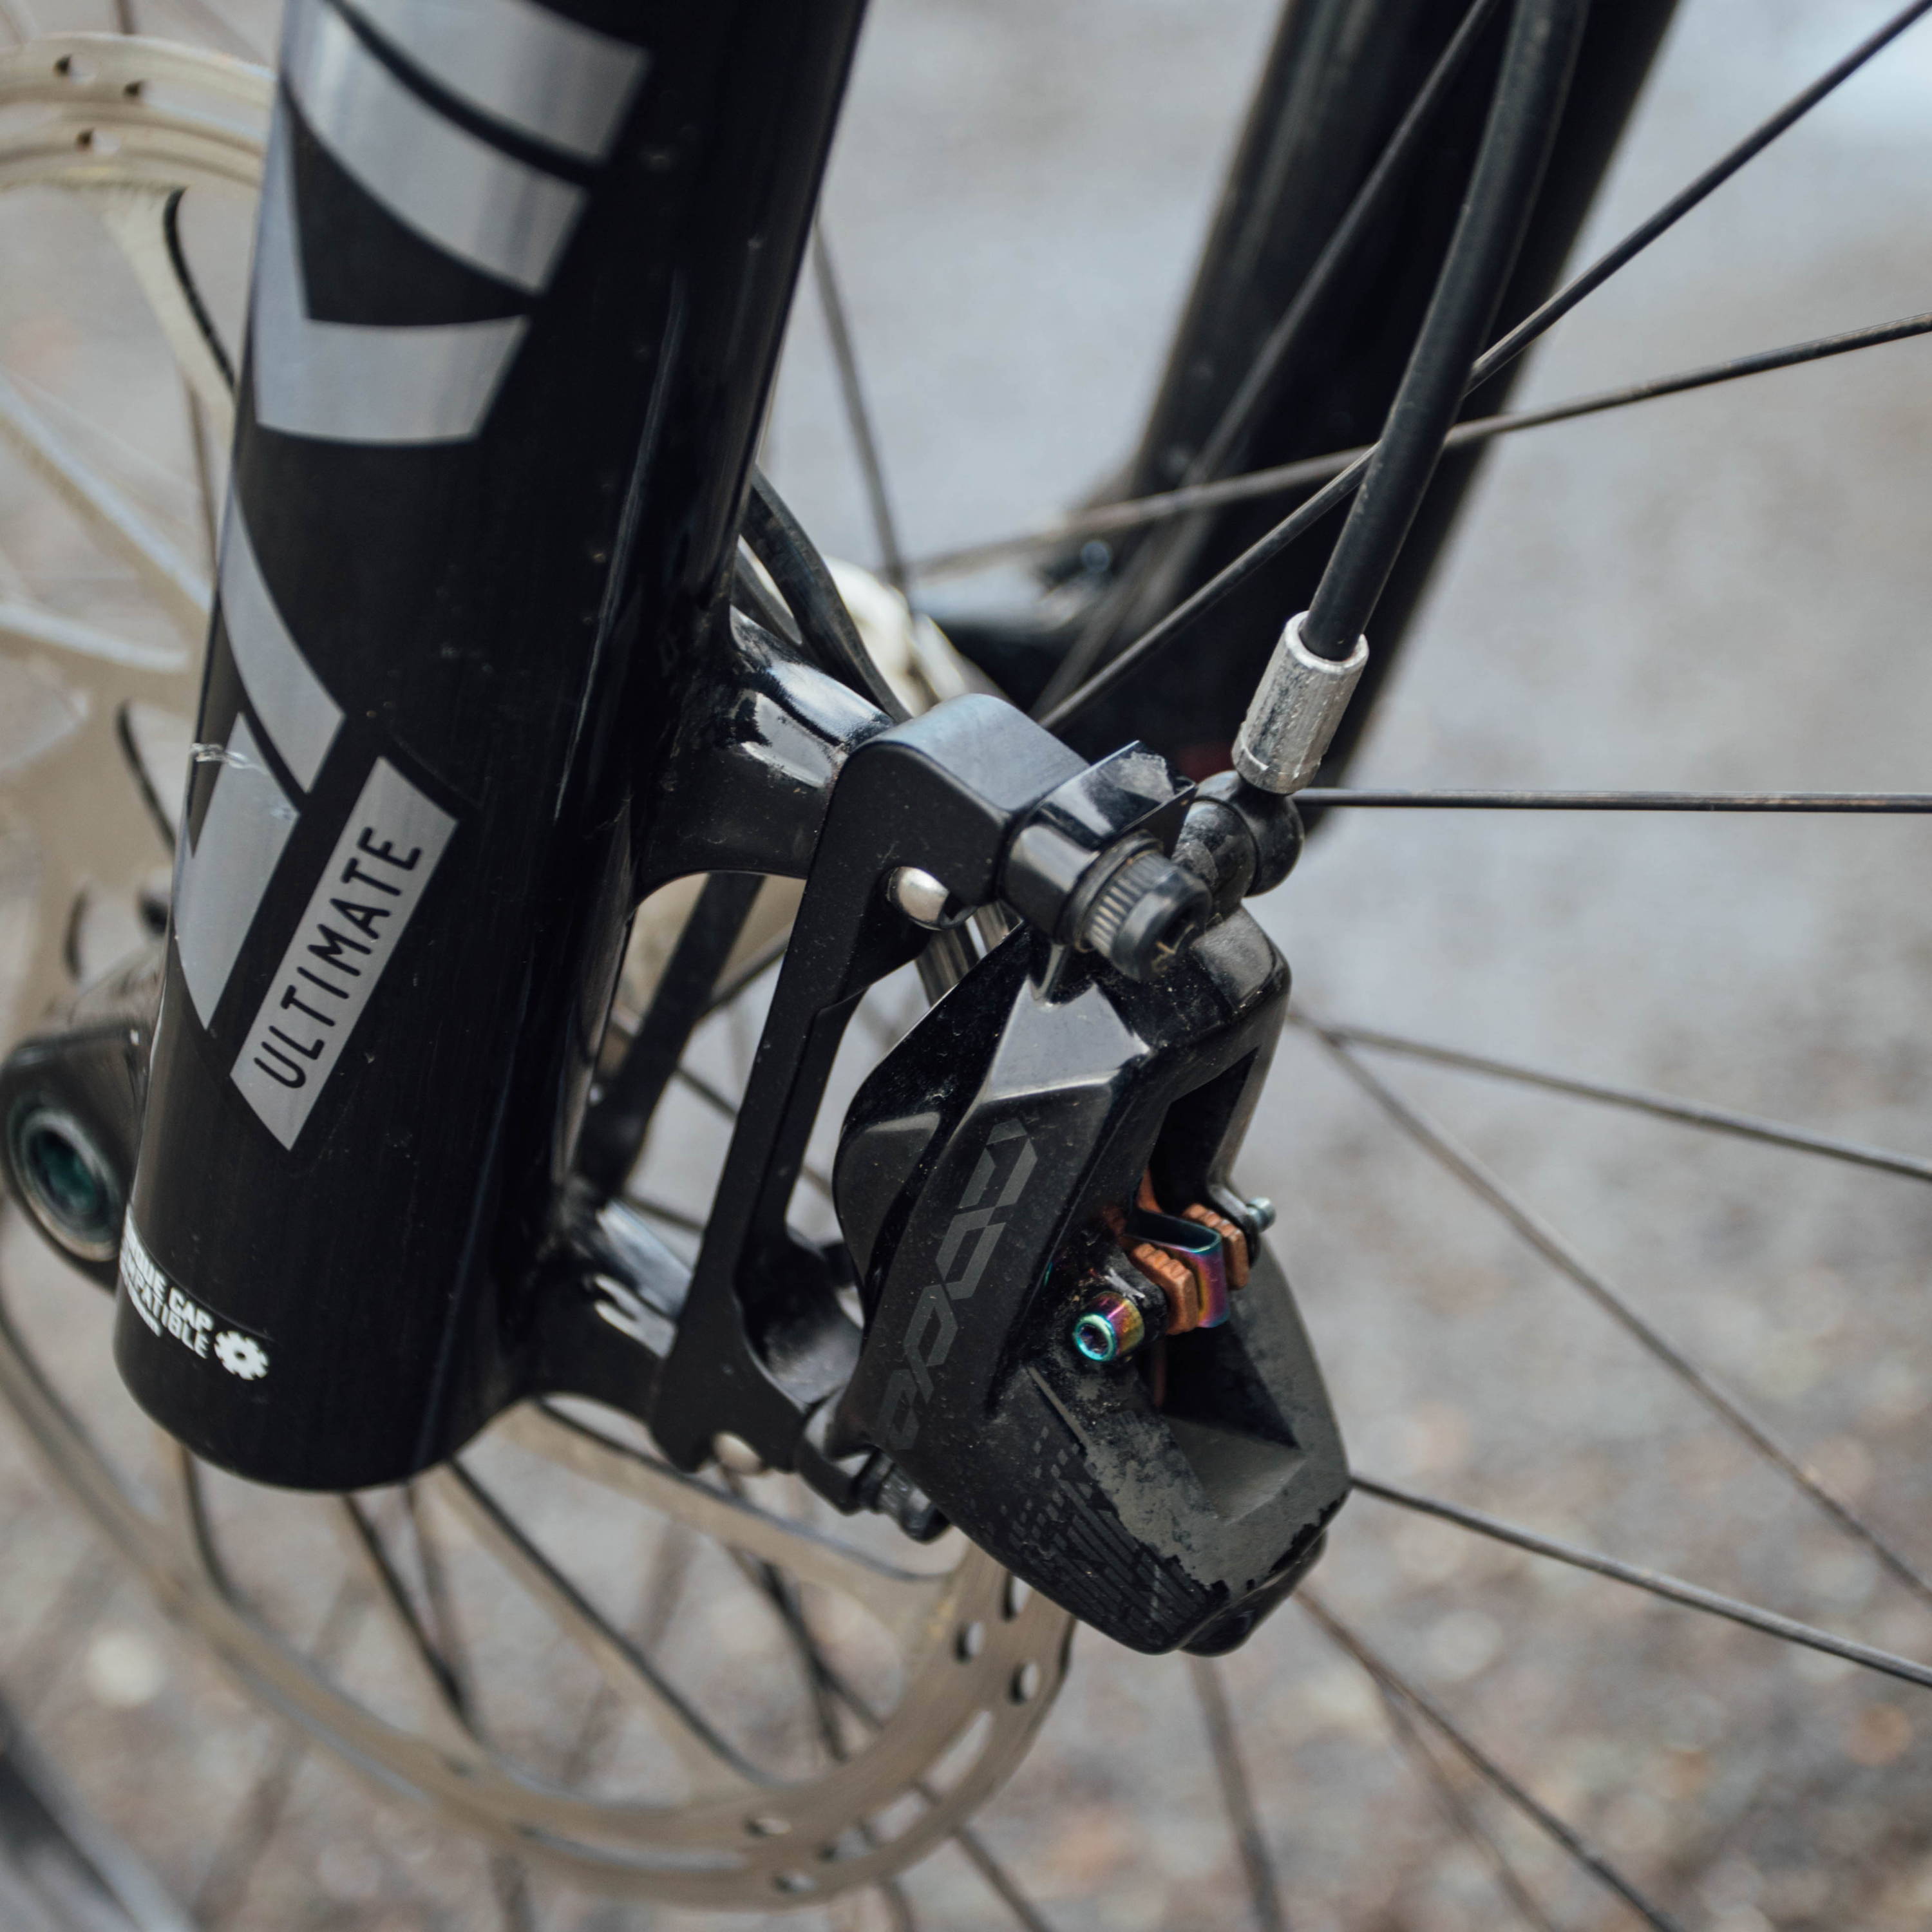 SRAM Code RSC mountain bike brakes review front caliper installed on a rockshox pike ultimate suspension fork